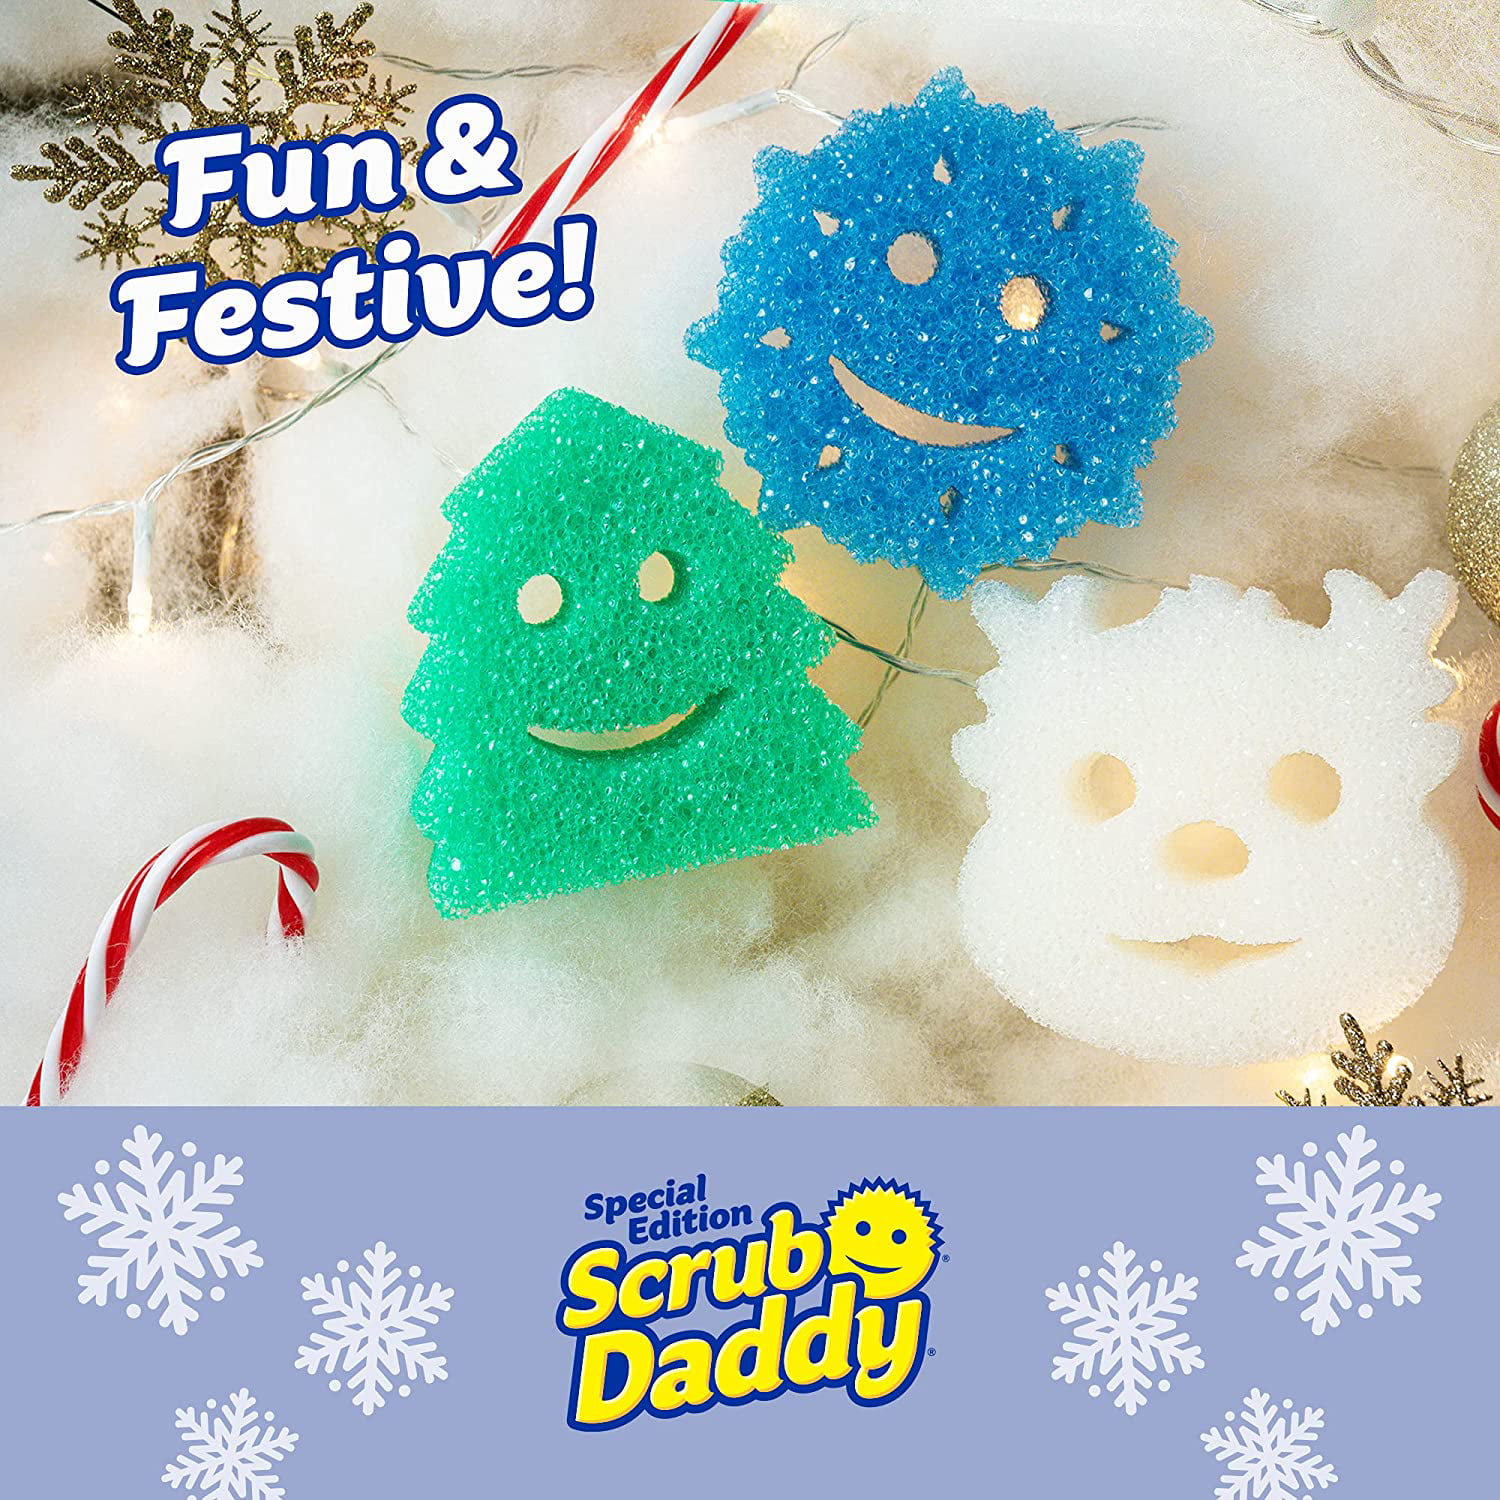 Scrub Daddy Non-Scratch Sponge Easy grip pack of 1 Yellow, Best Holiday Gift